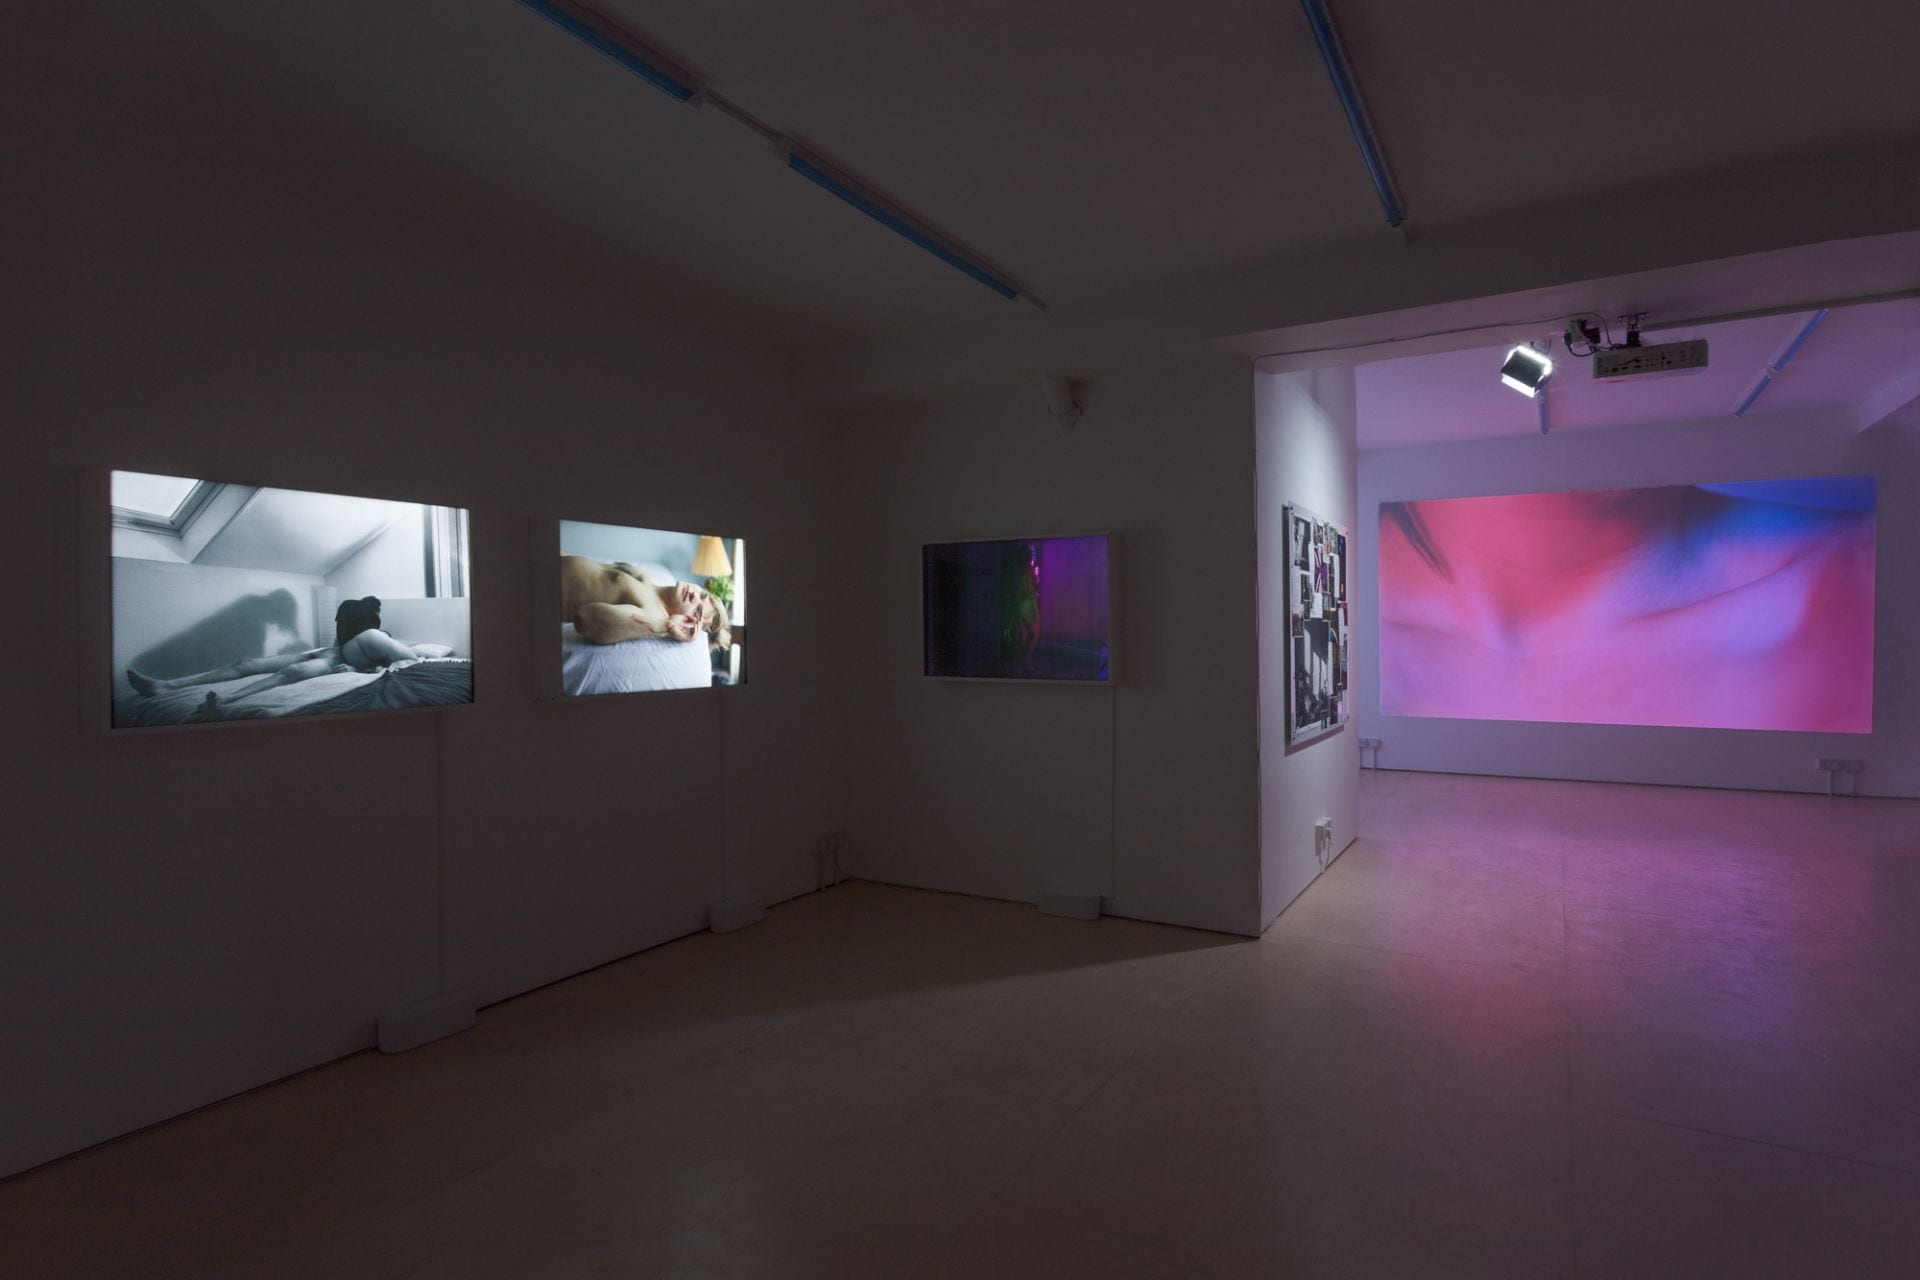 An exhibition of Liz Calvi's work at Seager space, showing five different films on display.